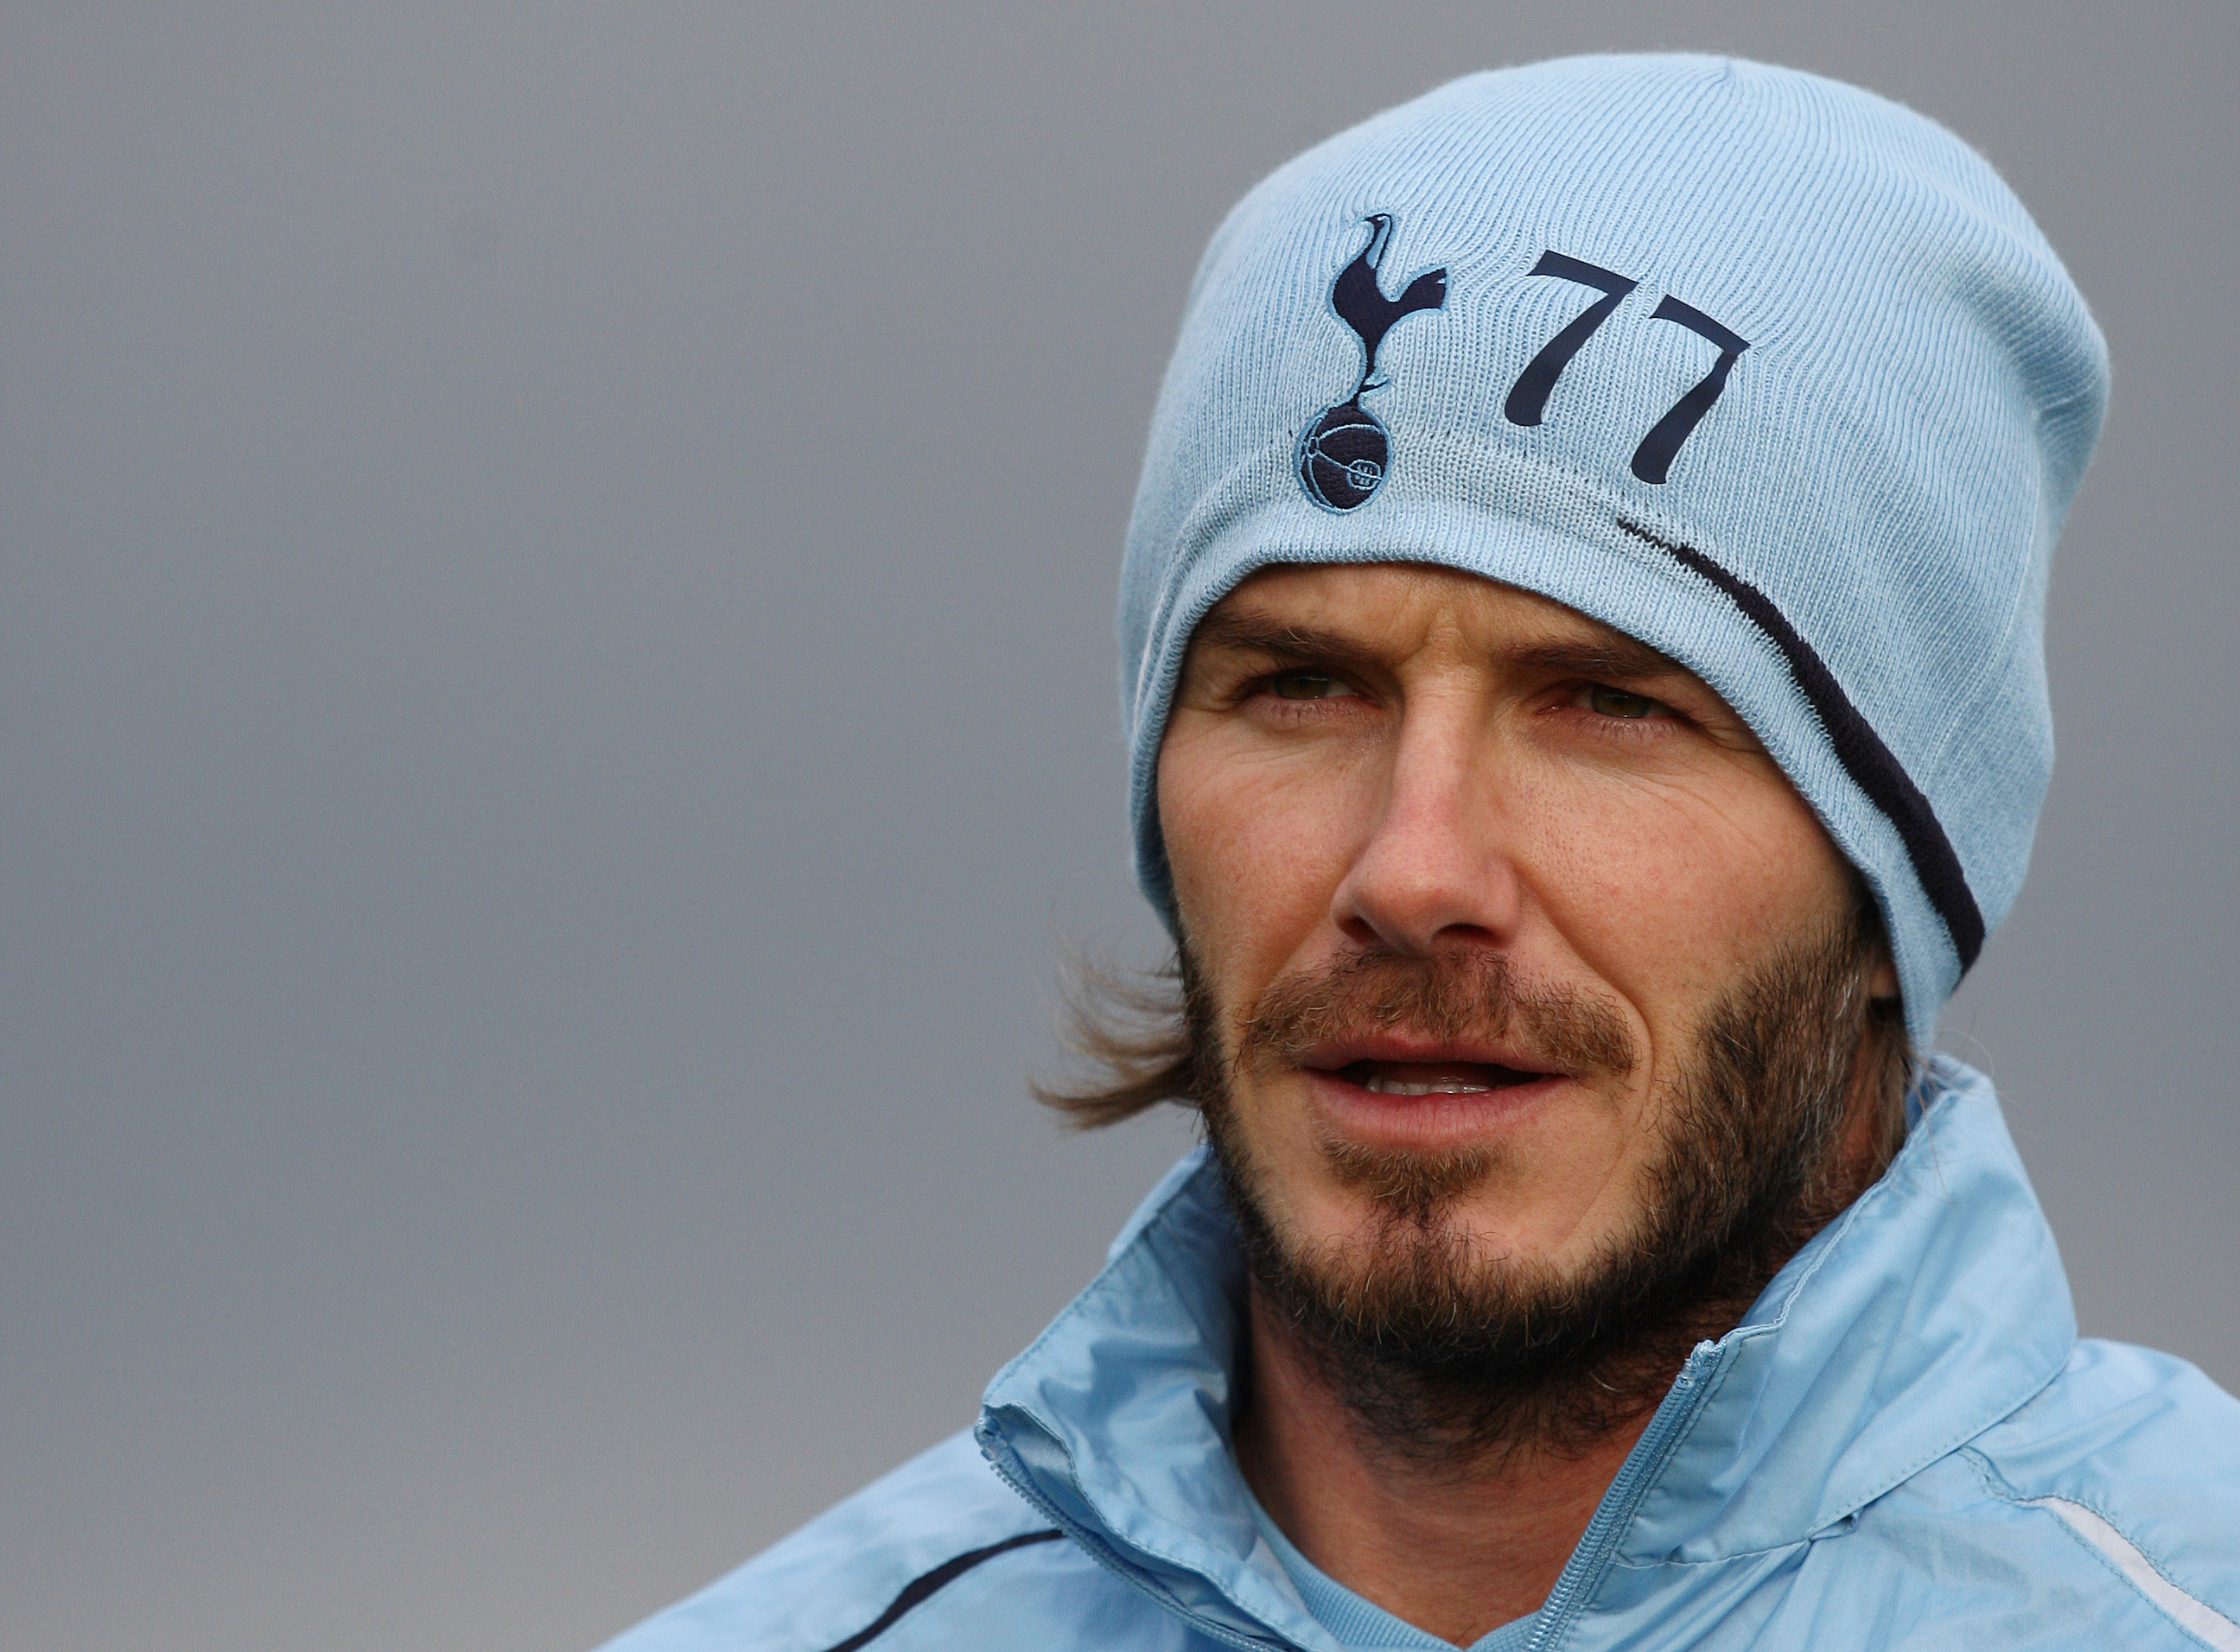 CHIGWELL, ENGLAND - JANUARY 11:  David Beckham takes part in a Tottenham Hotspur training session at Tottenham Hotspur training ground on January 11, 2011 in Chigwell, England.  (Photo by Paul Childs - Pool/Getty Images)